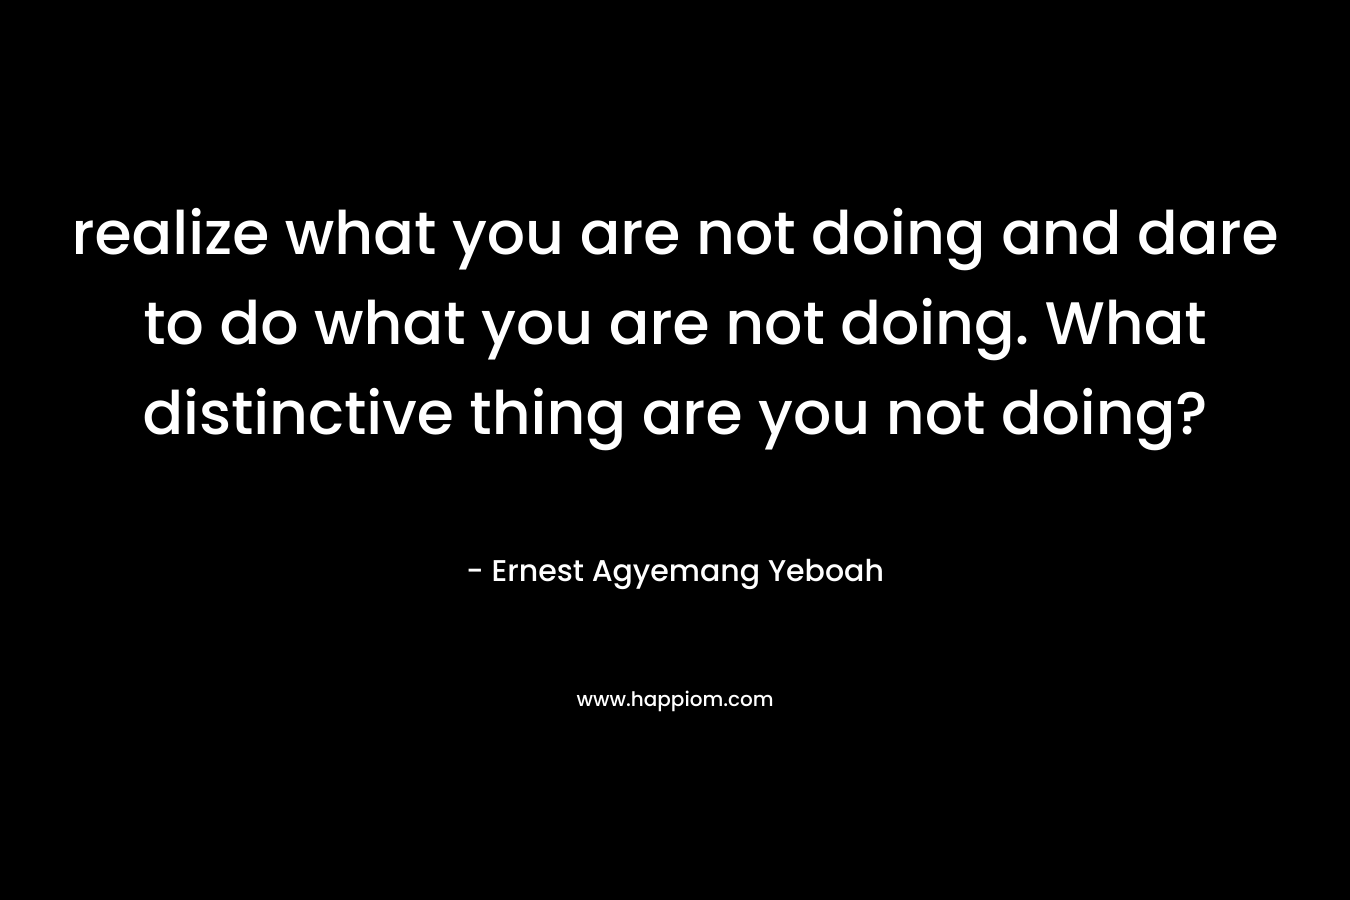 realize what you are not doing and dare to do what you are not doing. What distinctive thing are you not doing?